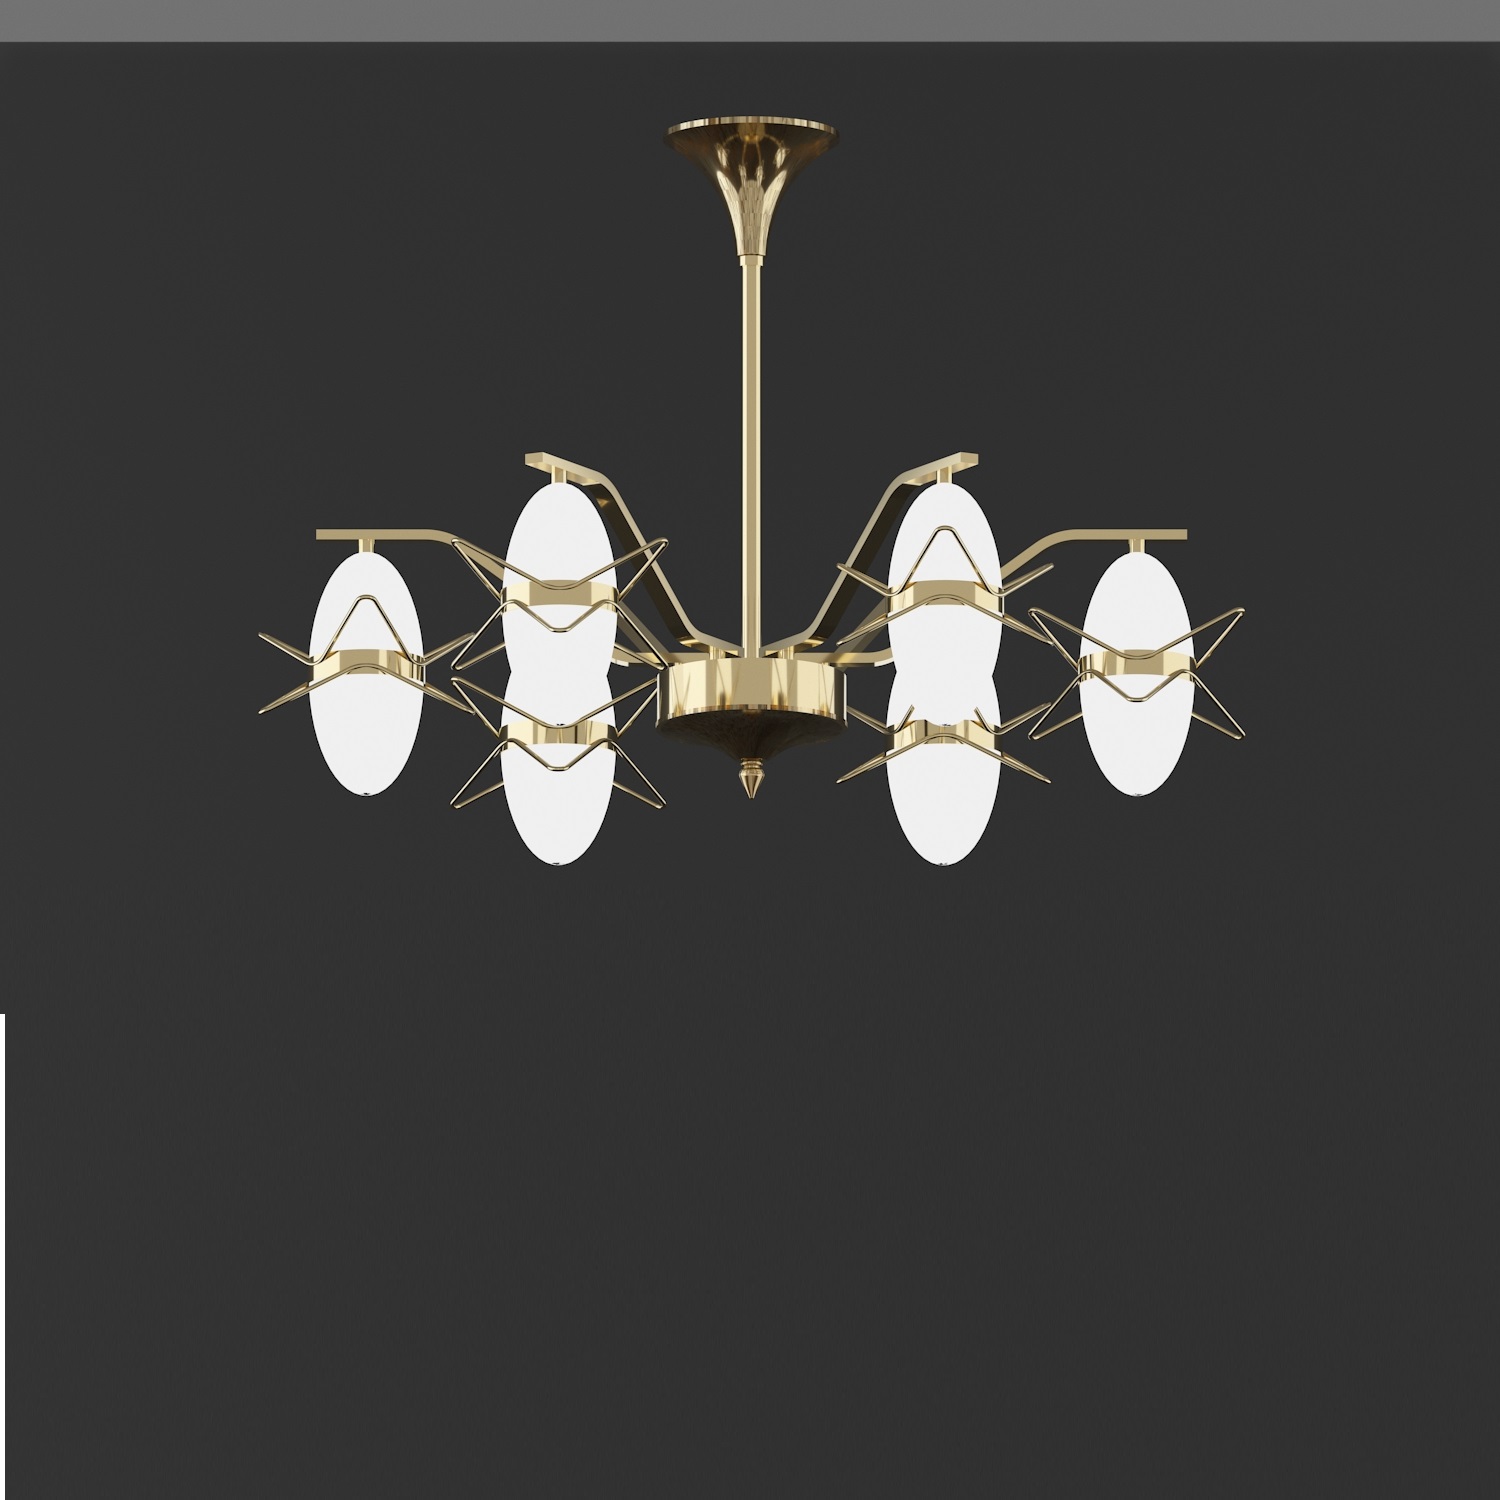 haibang,chandelier,simple,kitchen